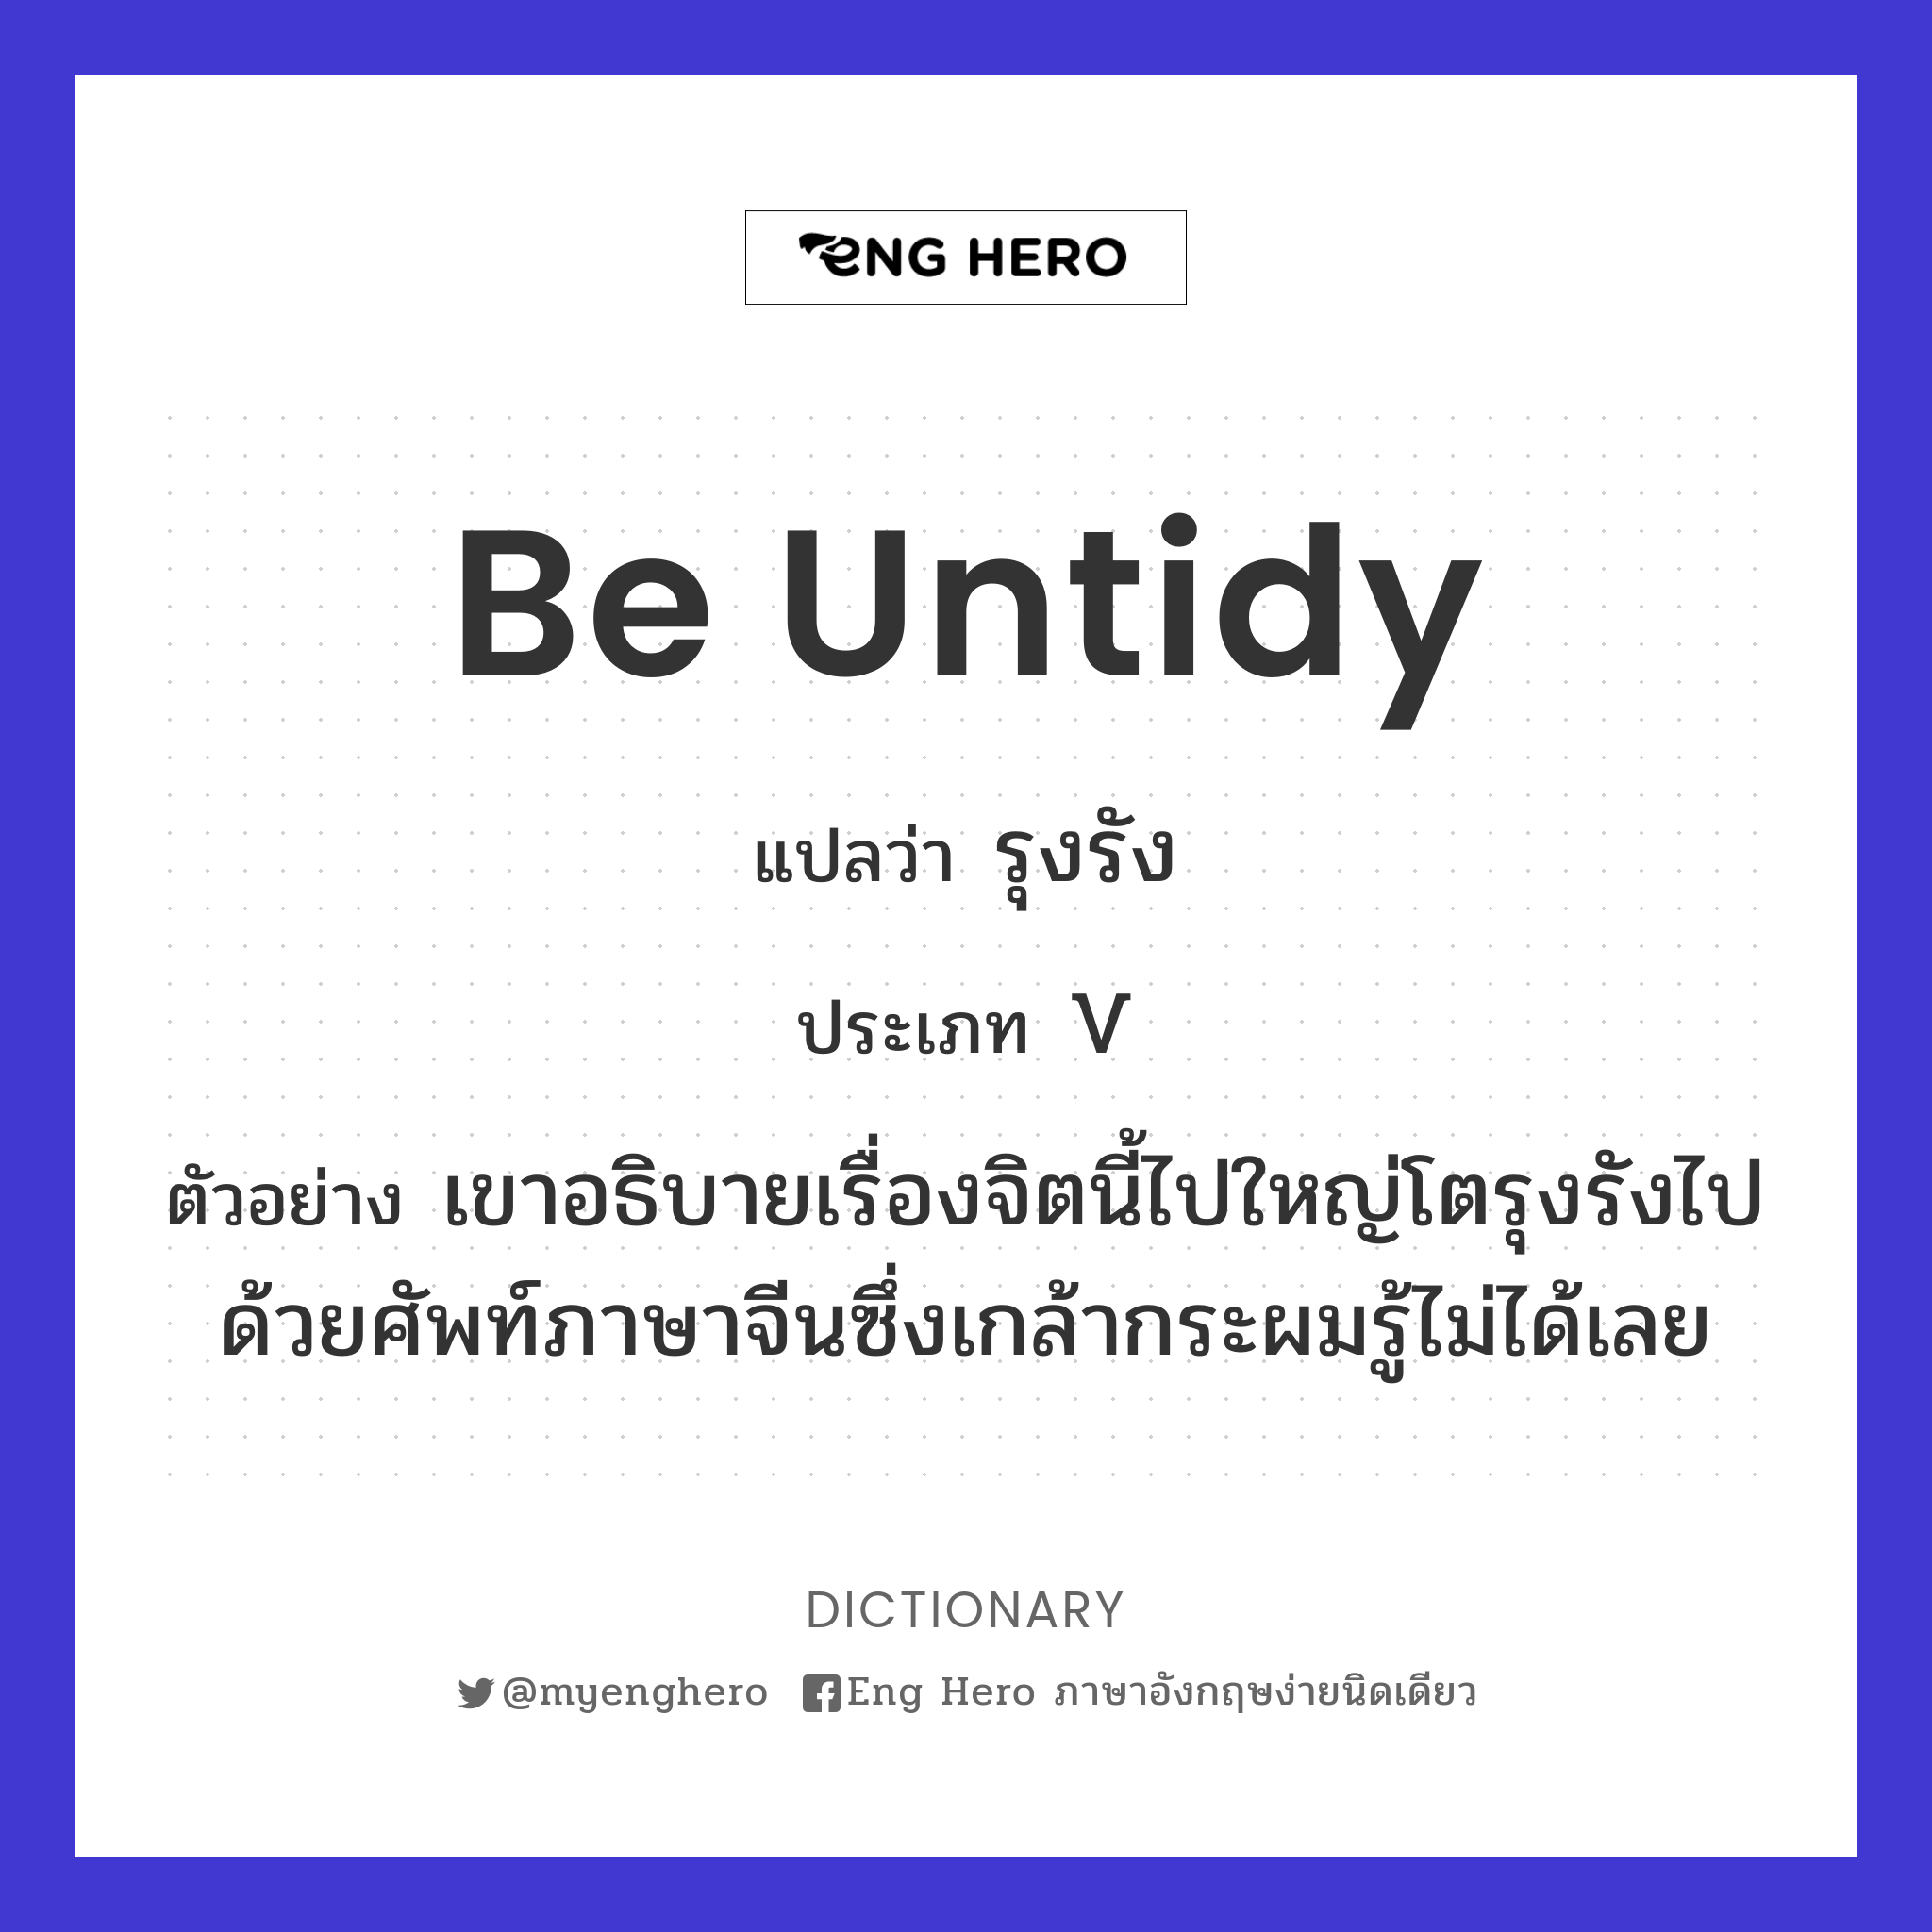 be untidy